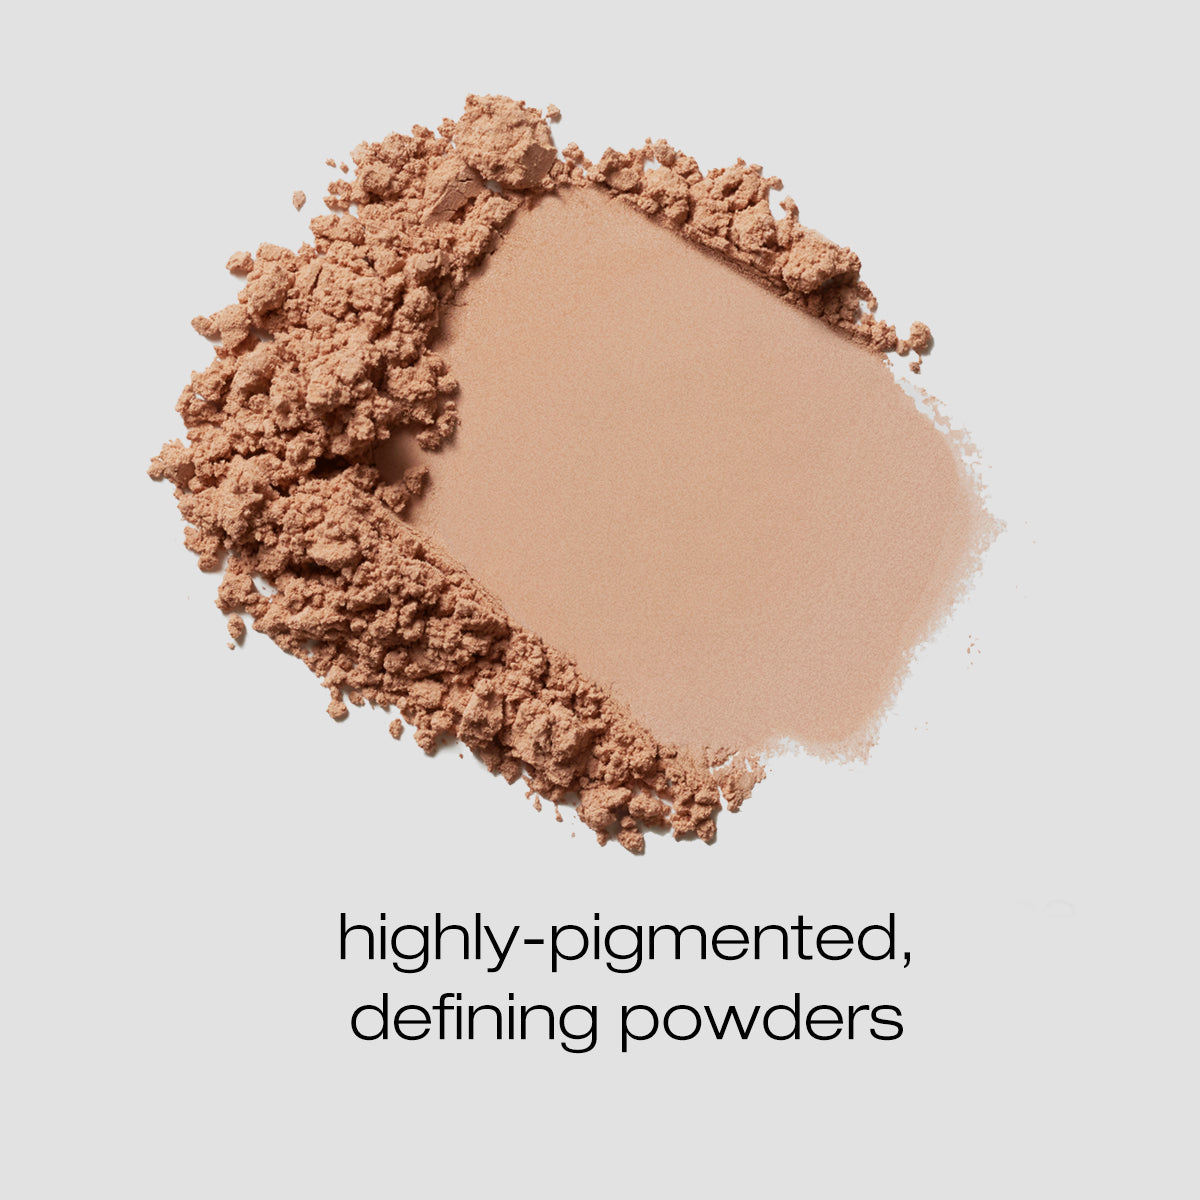 Spread of malt and described as highly-pigmented, defining powders